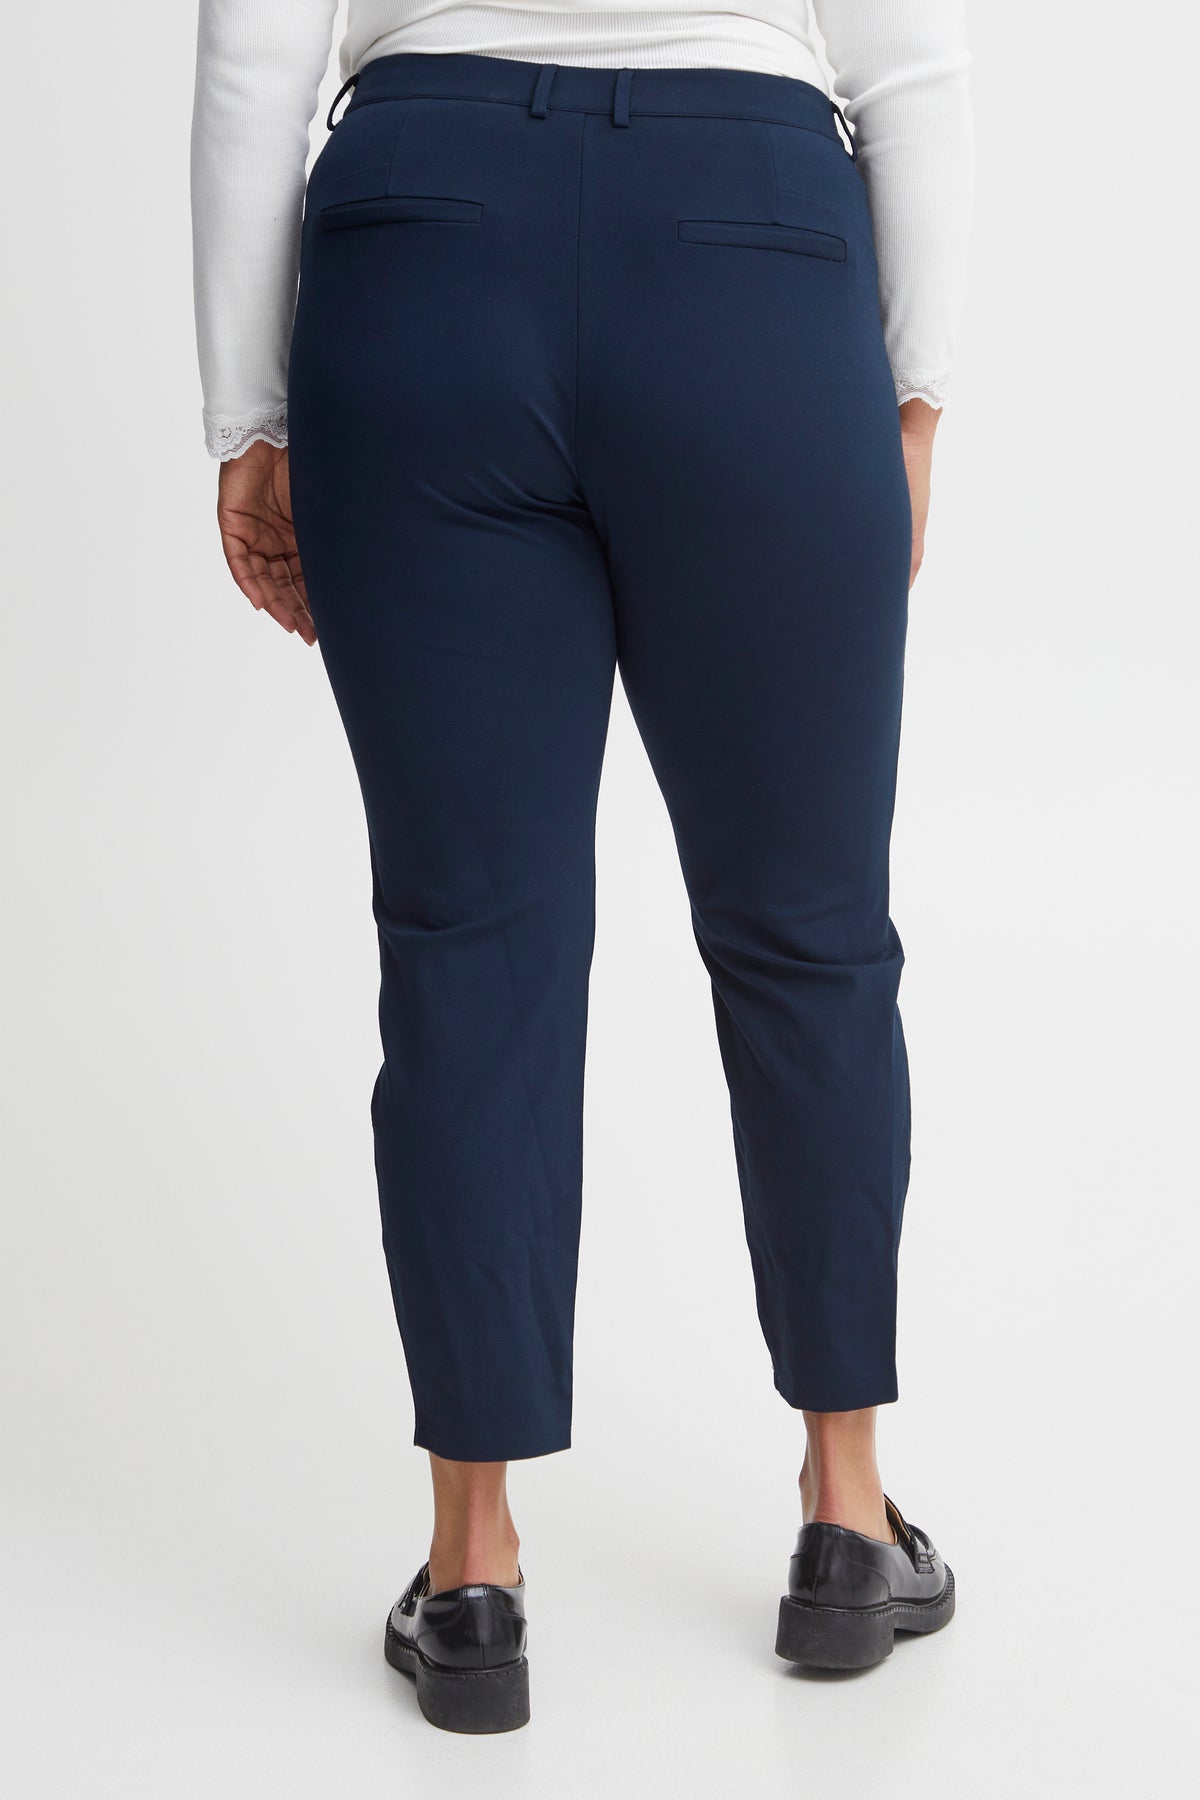 The Naomi Curve Trouser in Navy